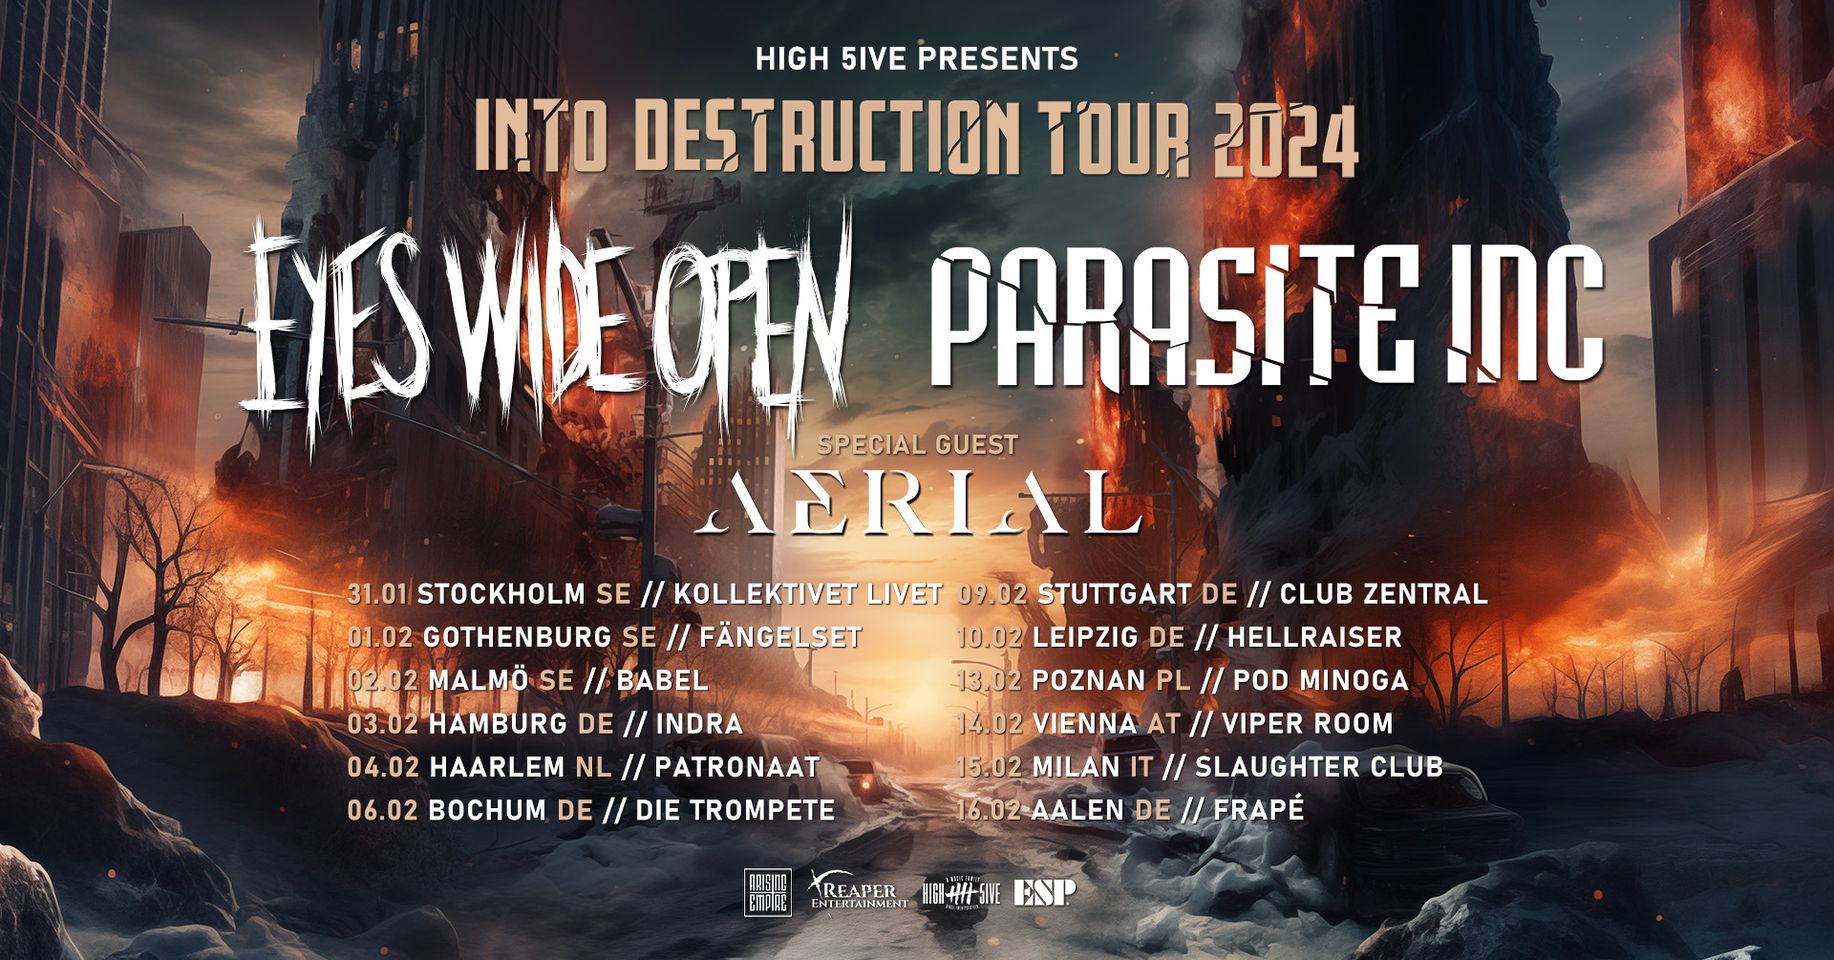 Eyes Wide Open + Parasite Inc. am 14. February 2024 @ Viper Room.